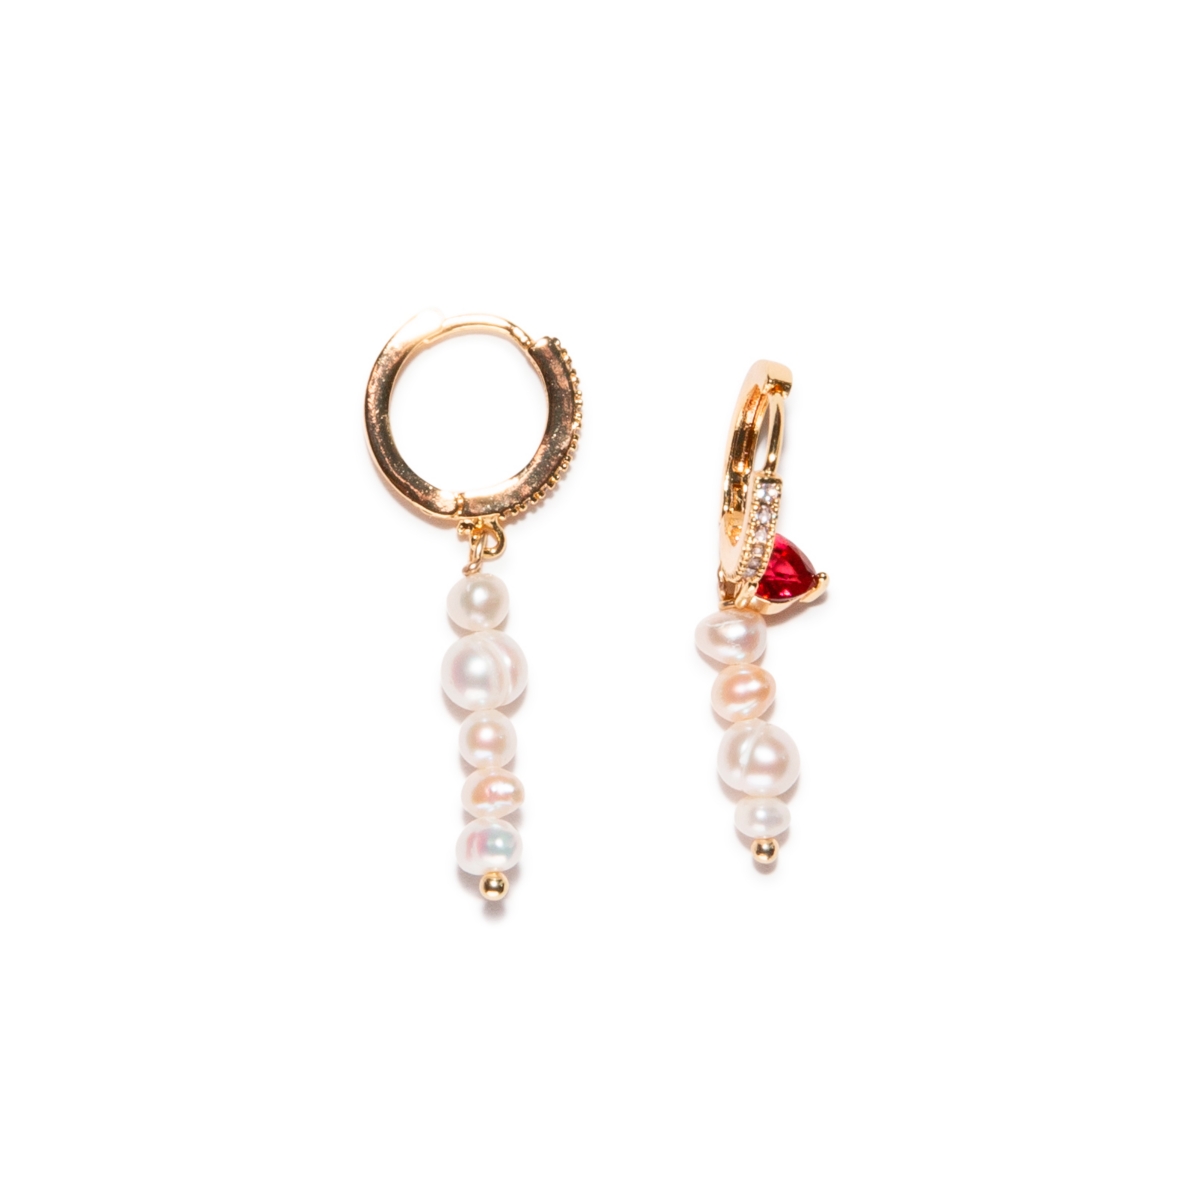 JOEY BABY 18K GOLD PLATED MIX OF EXTRA SMALL AND SMALL SIZE FRESHWATER PEARLS WITH A LITTLE RED HEART ZIRCONIA